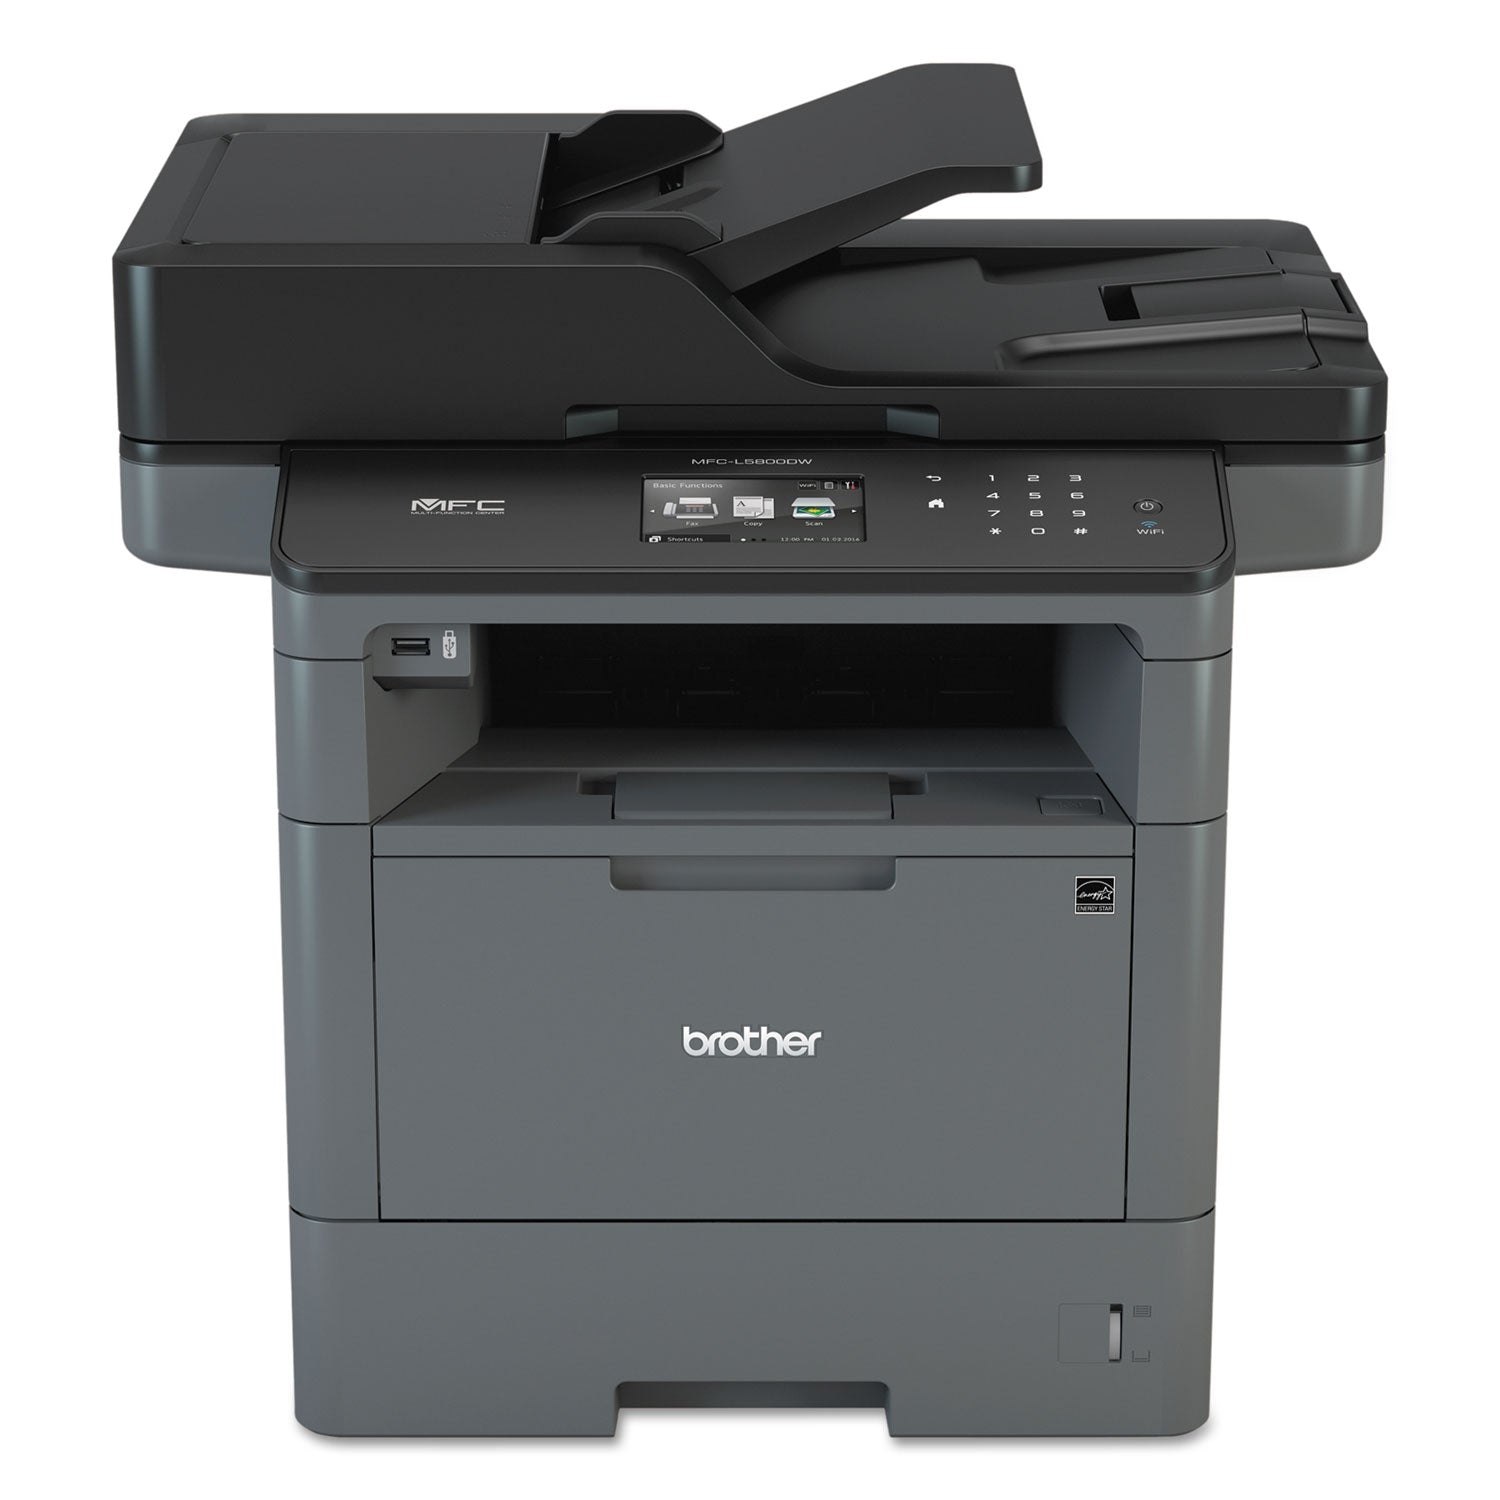 mfcl6800dw-business-laser-all-in-one-printer-for-mid-size-workgroups-with-higher-print-volumes_brtmfcl6800dw - 1